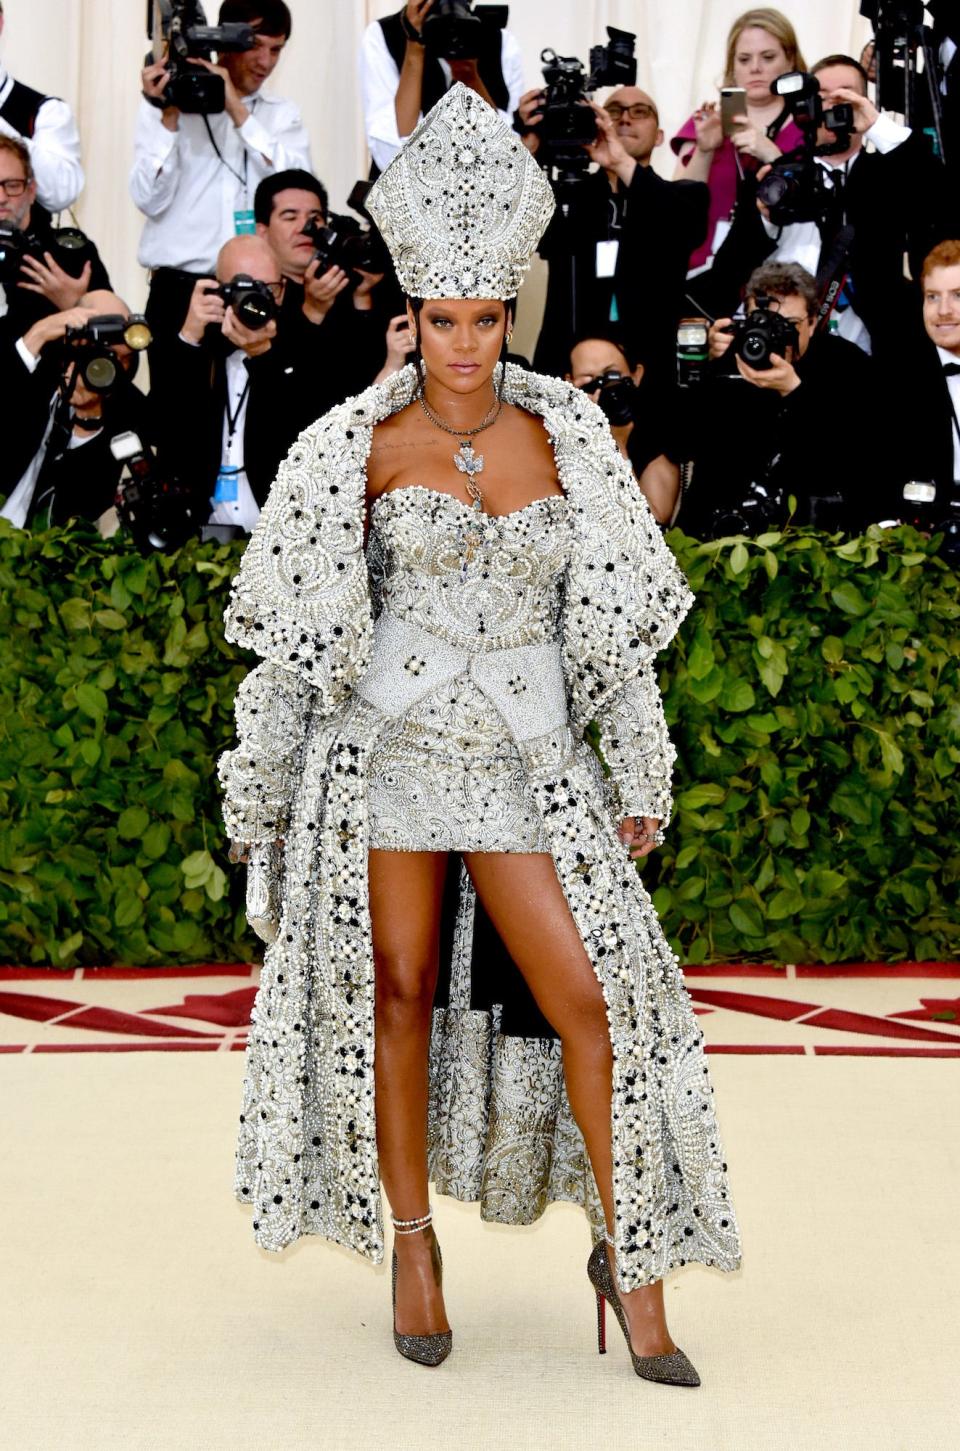 Rihanna attends the 2018 Met Gala wearing a bedazzled papal look, complete with a pope hat.